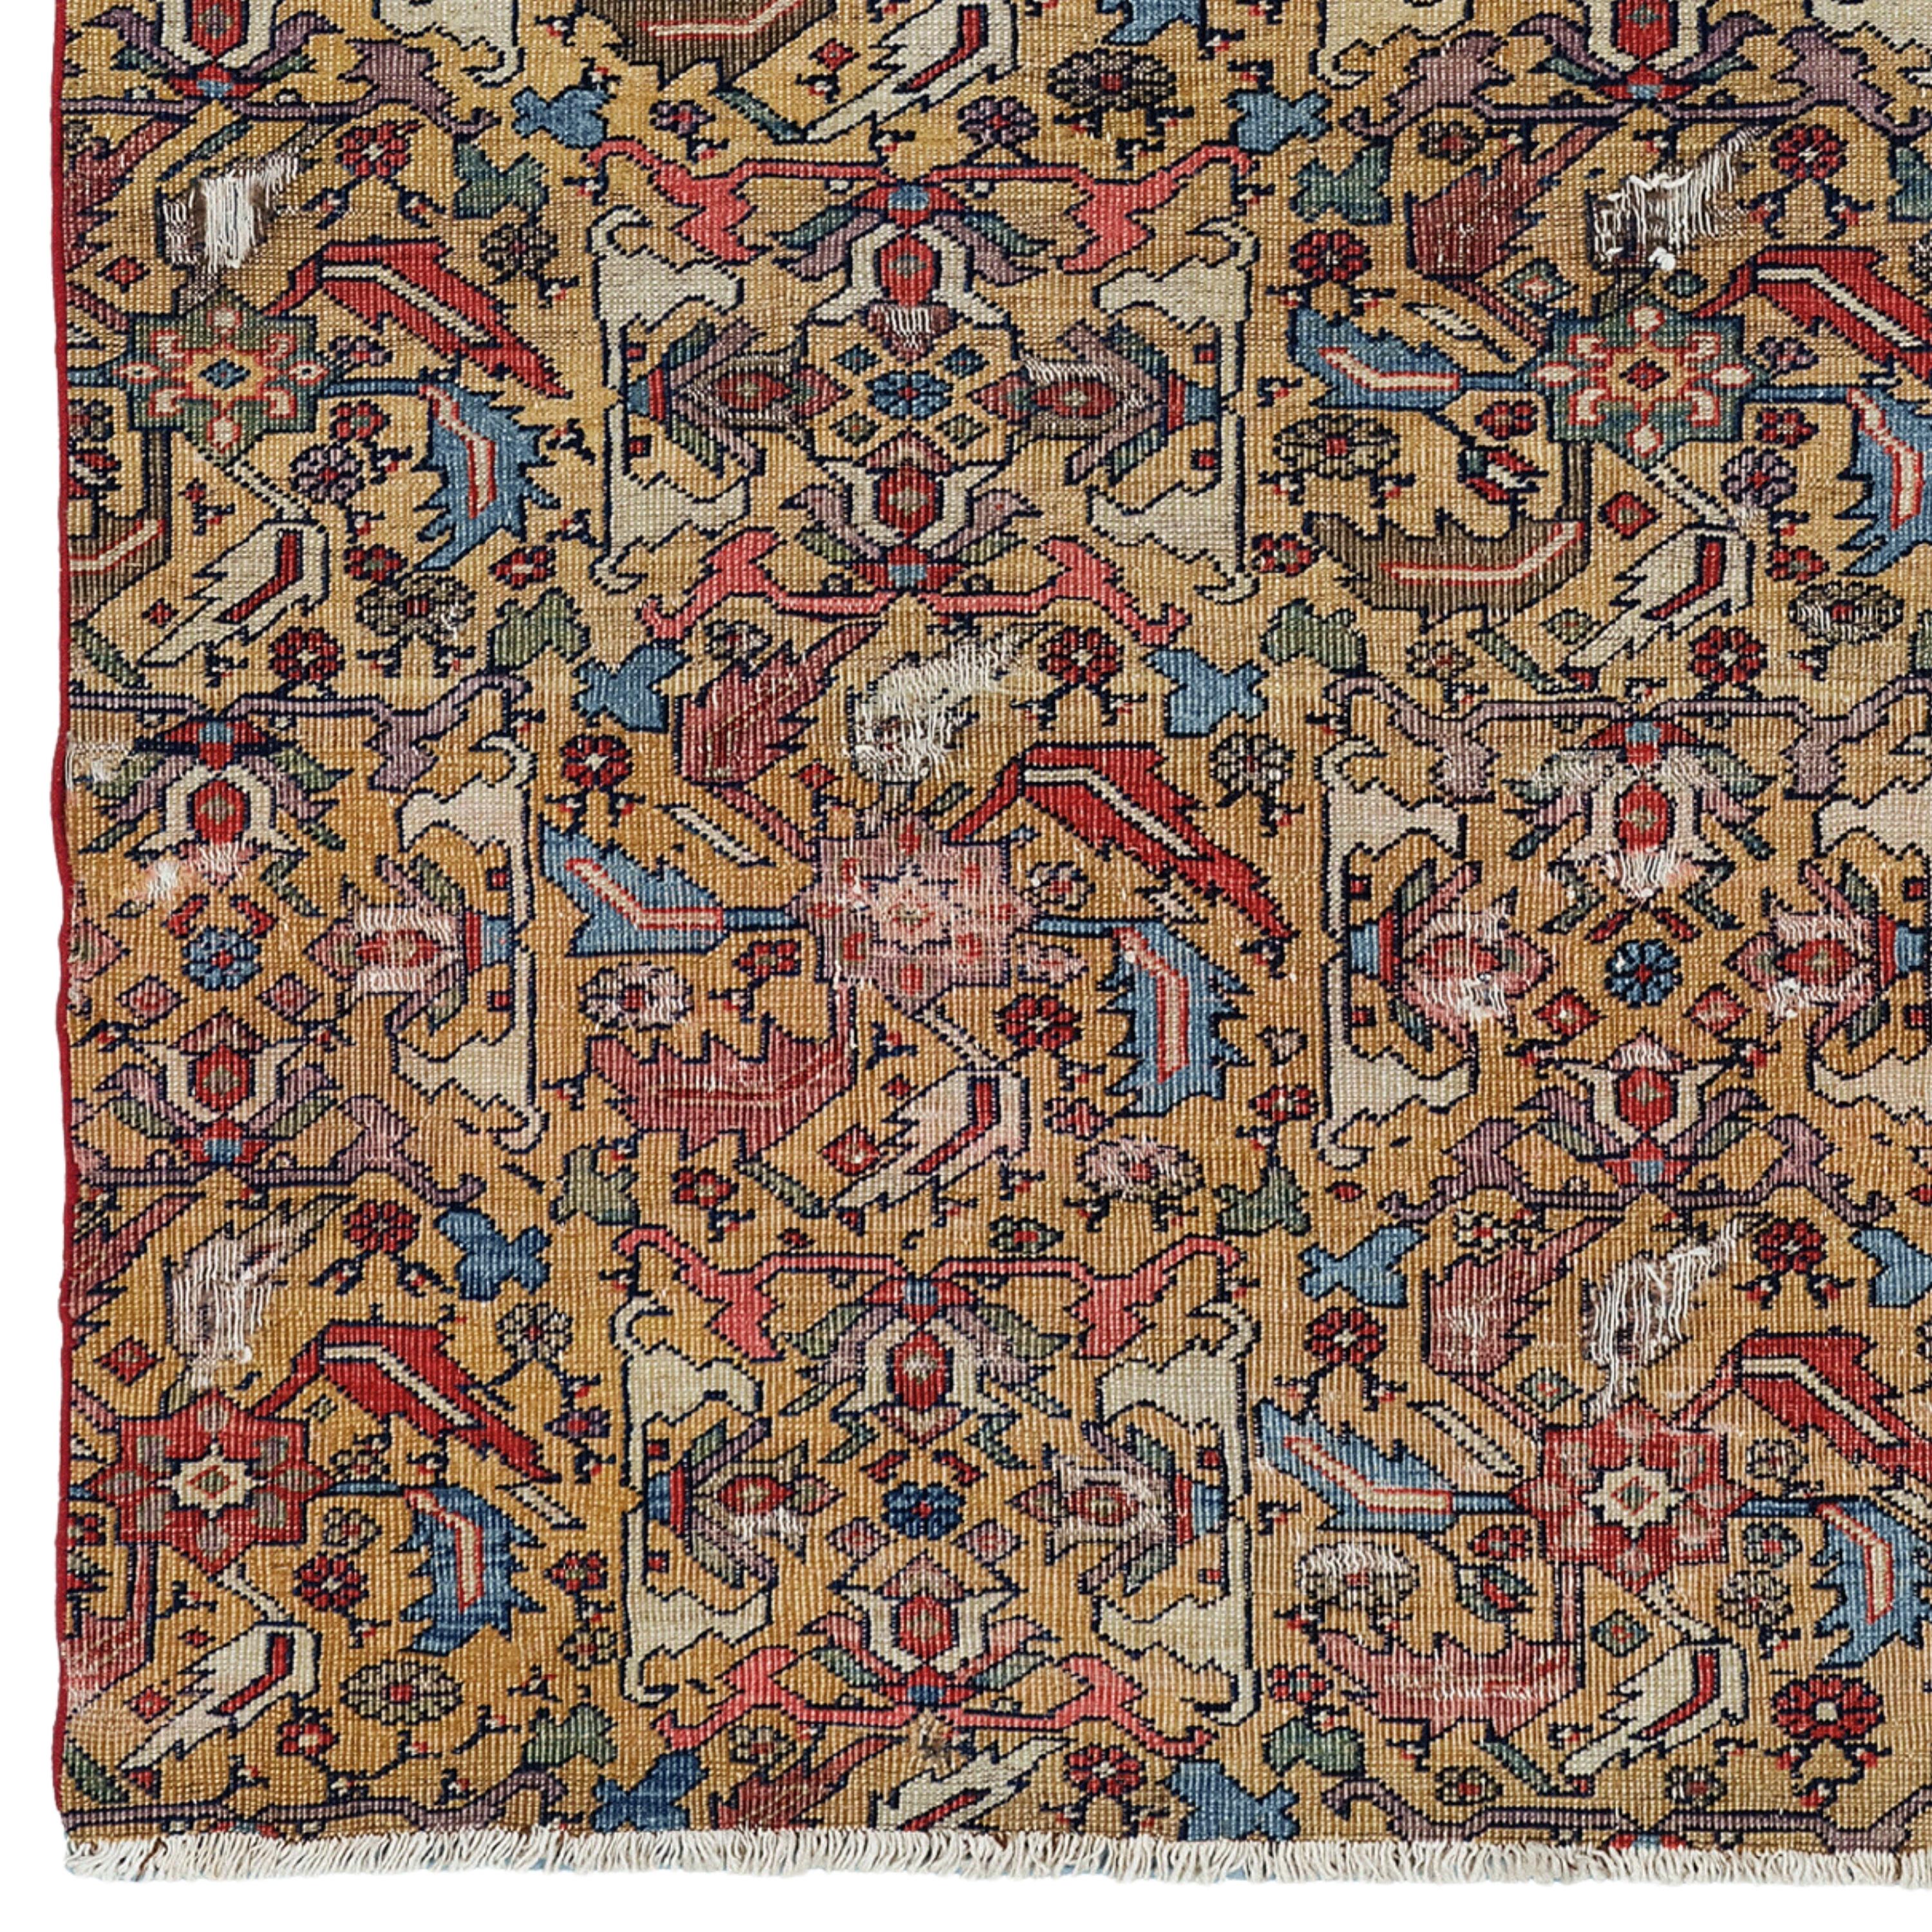 This elegant 19th-century Persian rug is an excellent choice for antique collectors and individuals with aesthetic taste. With its rich color palette and intricate patterns, this rug piece is ideal for adding a sophisticated touch to any room. This